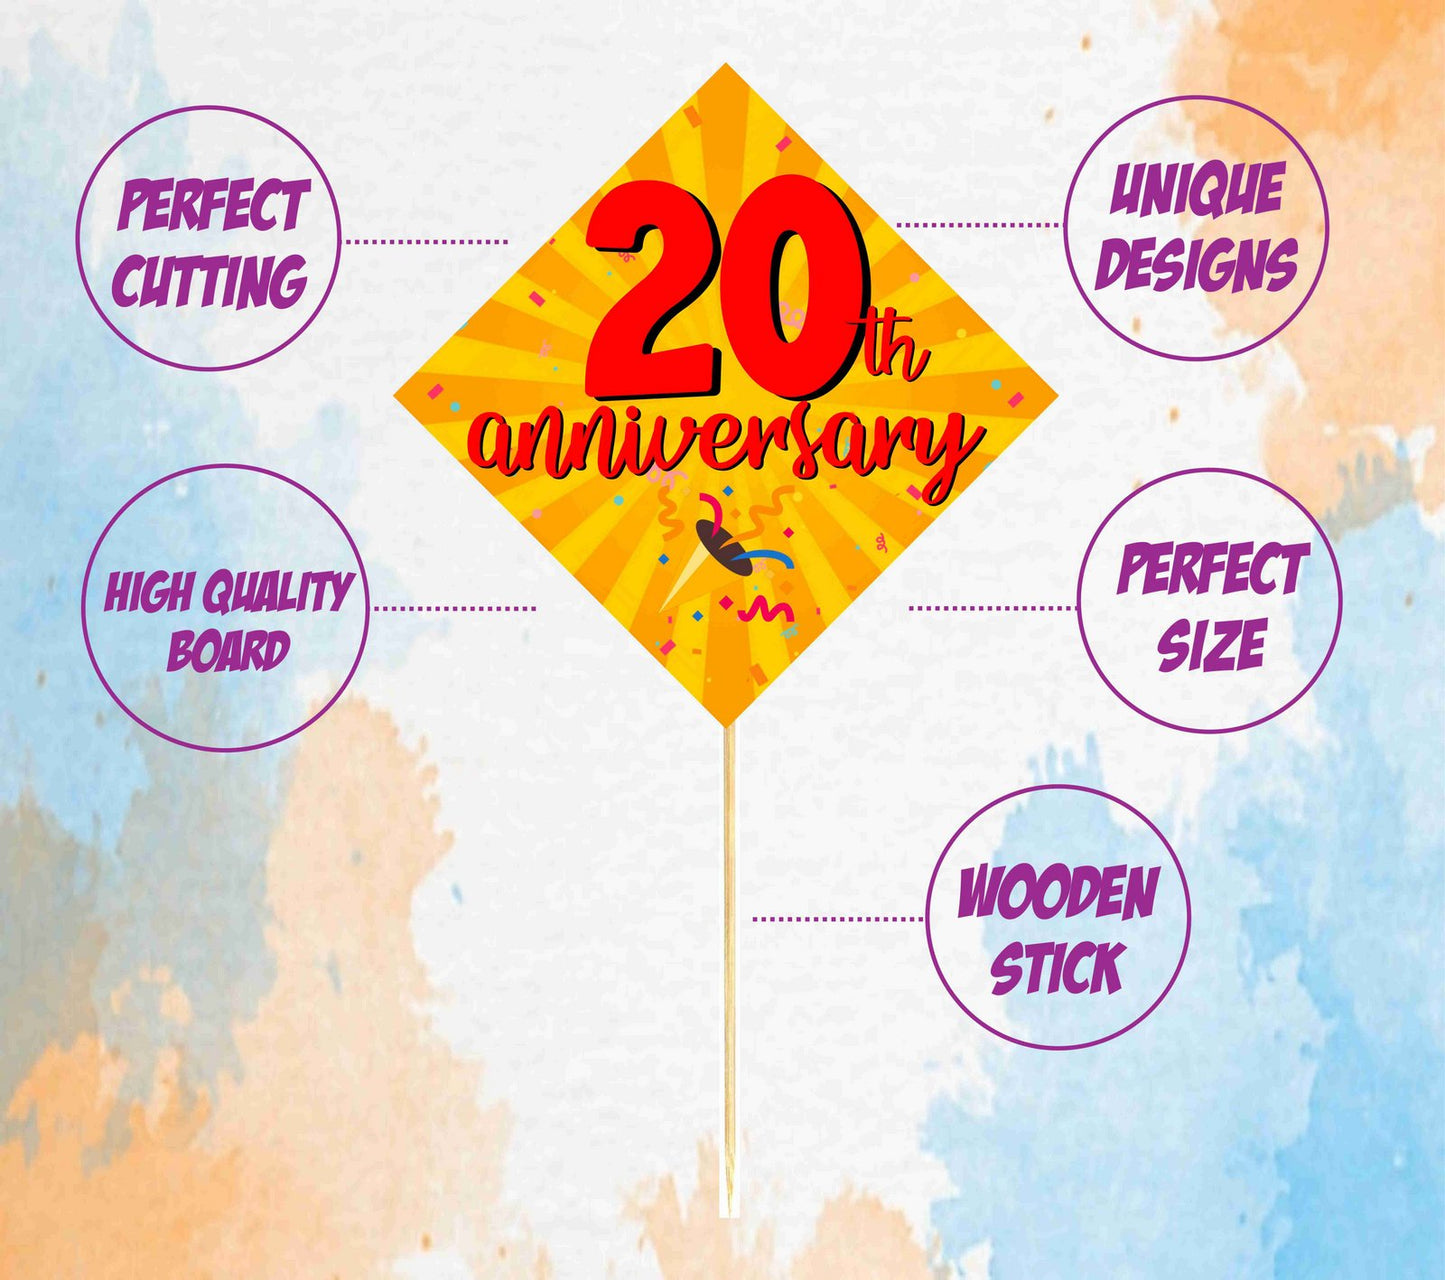 20th Anniversary Theme Props Anniversary Decoration Backdrop Photo Shoot, Photo Booth Party Item